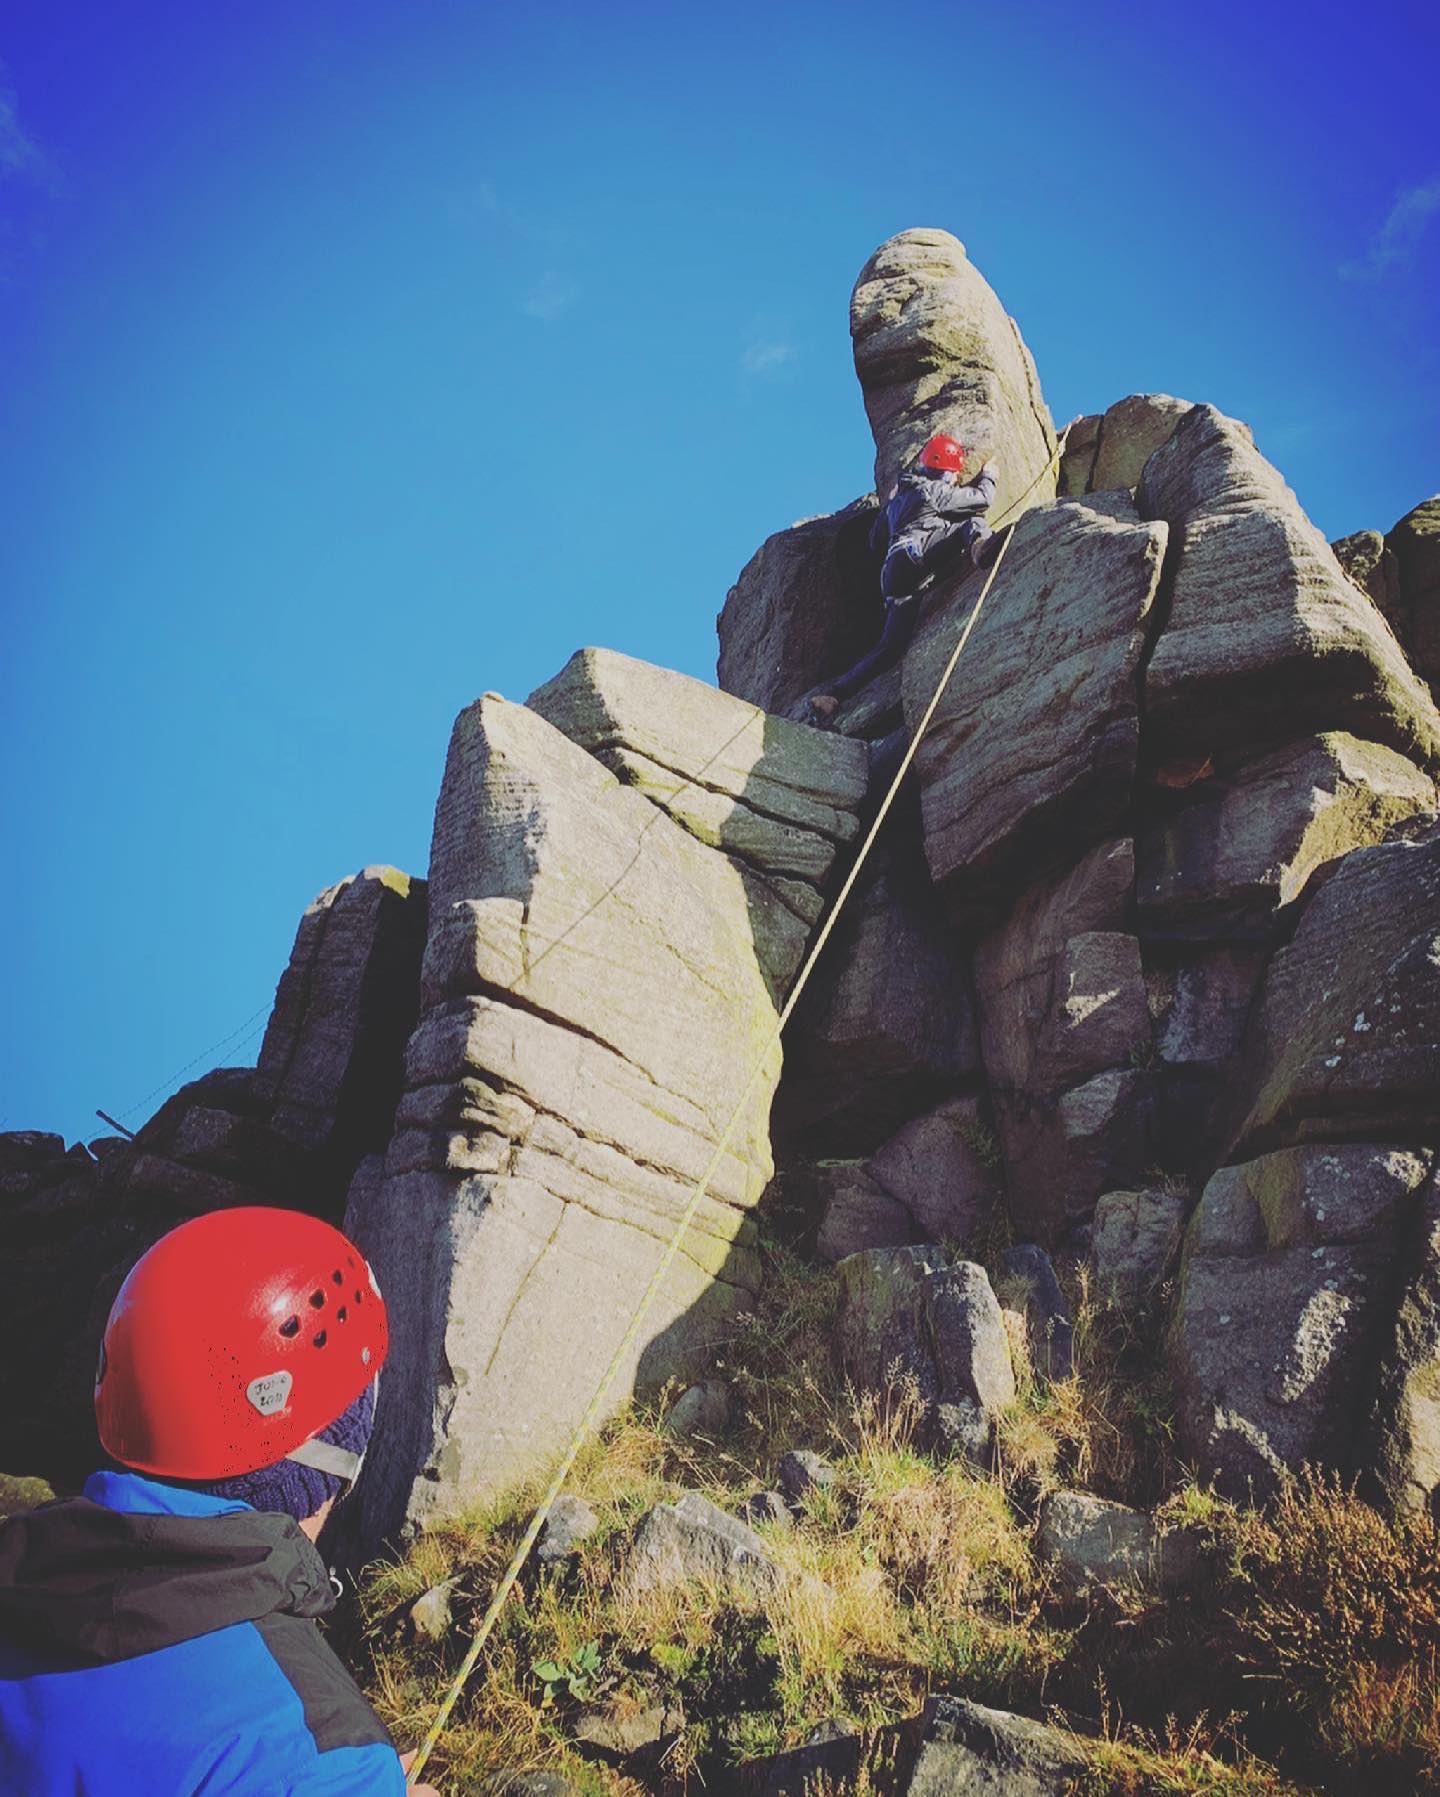 Spaces rock climbing and abseiling in the Peak District on:
18th April 
1st May
8th May
More info and booking at www.wilderness-development.com, link in our bio 🧗‍♀️⛰🧗‍♀️
.
.
.
#wildernessdevelopment #smallbusiness #rockclimbing #climbing #scrambling #abseiling #trysomethingnew #peakdistrict #peakdistrictnationalpark #peakdistrictclimbing #mountainsfellsandhikes #roamtheuk #outdoorpursuits #outdooradventures #outdooractivities #nationalparksuk #booknow